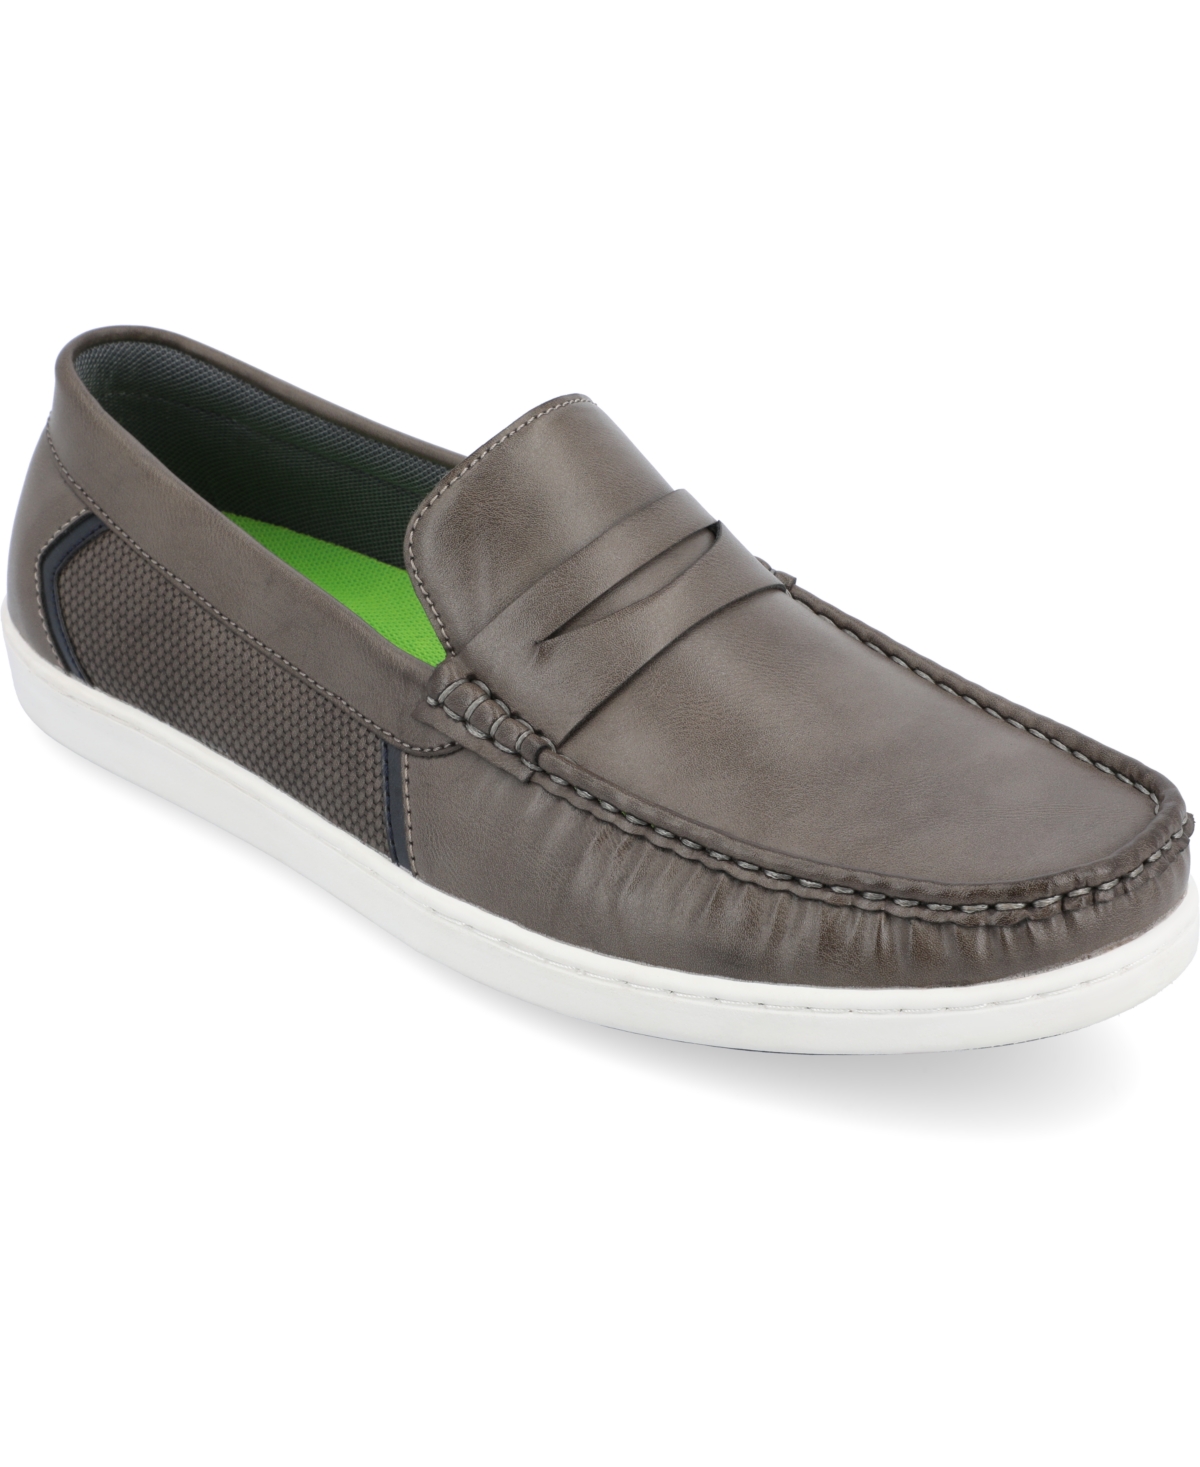 Men's Danny Penny Loafers - Gray